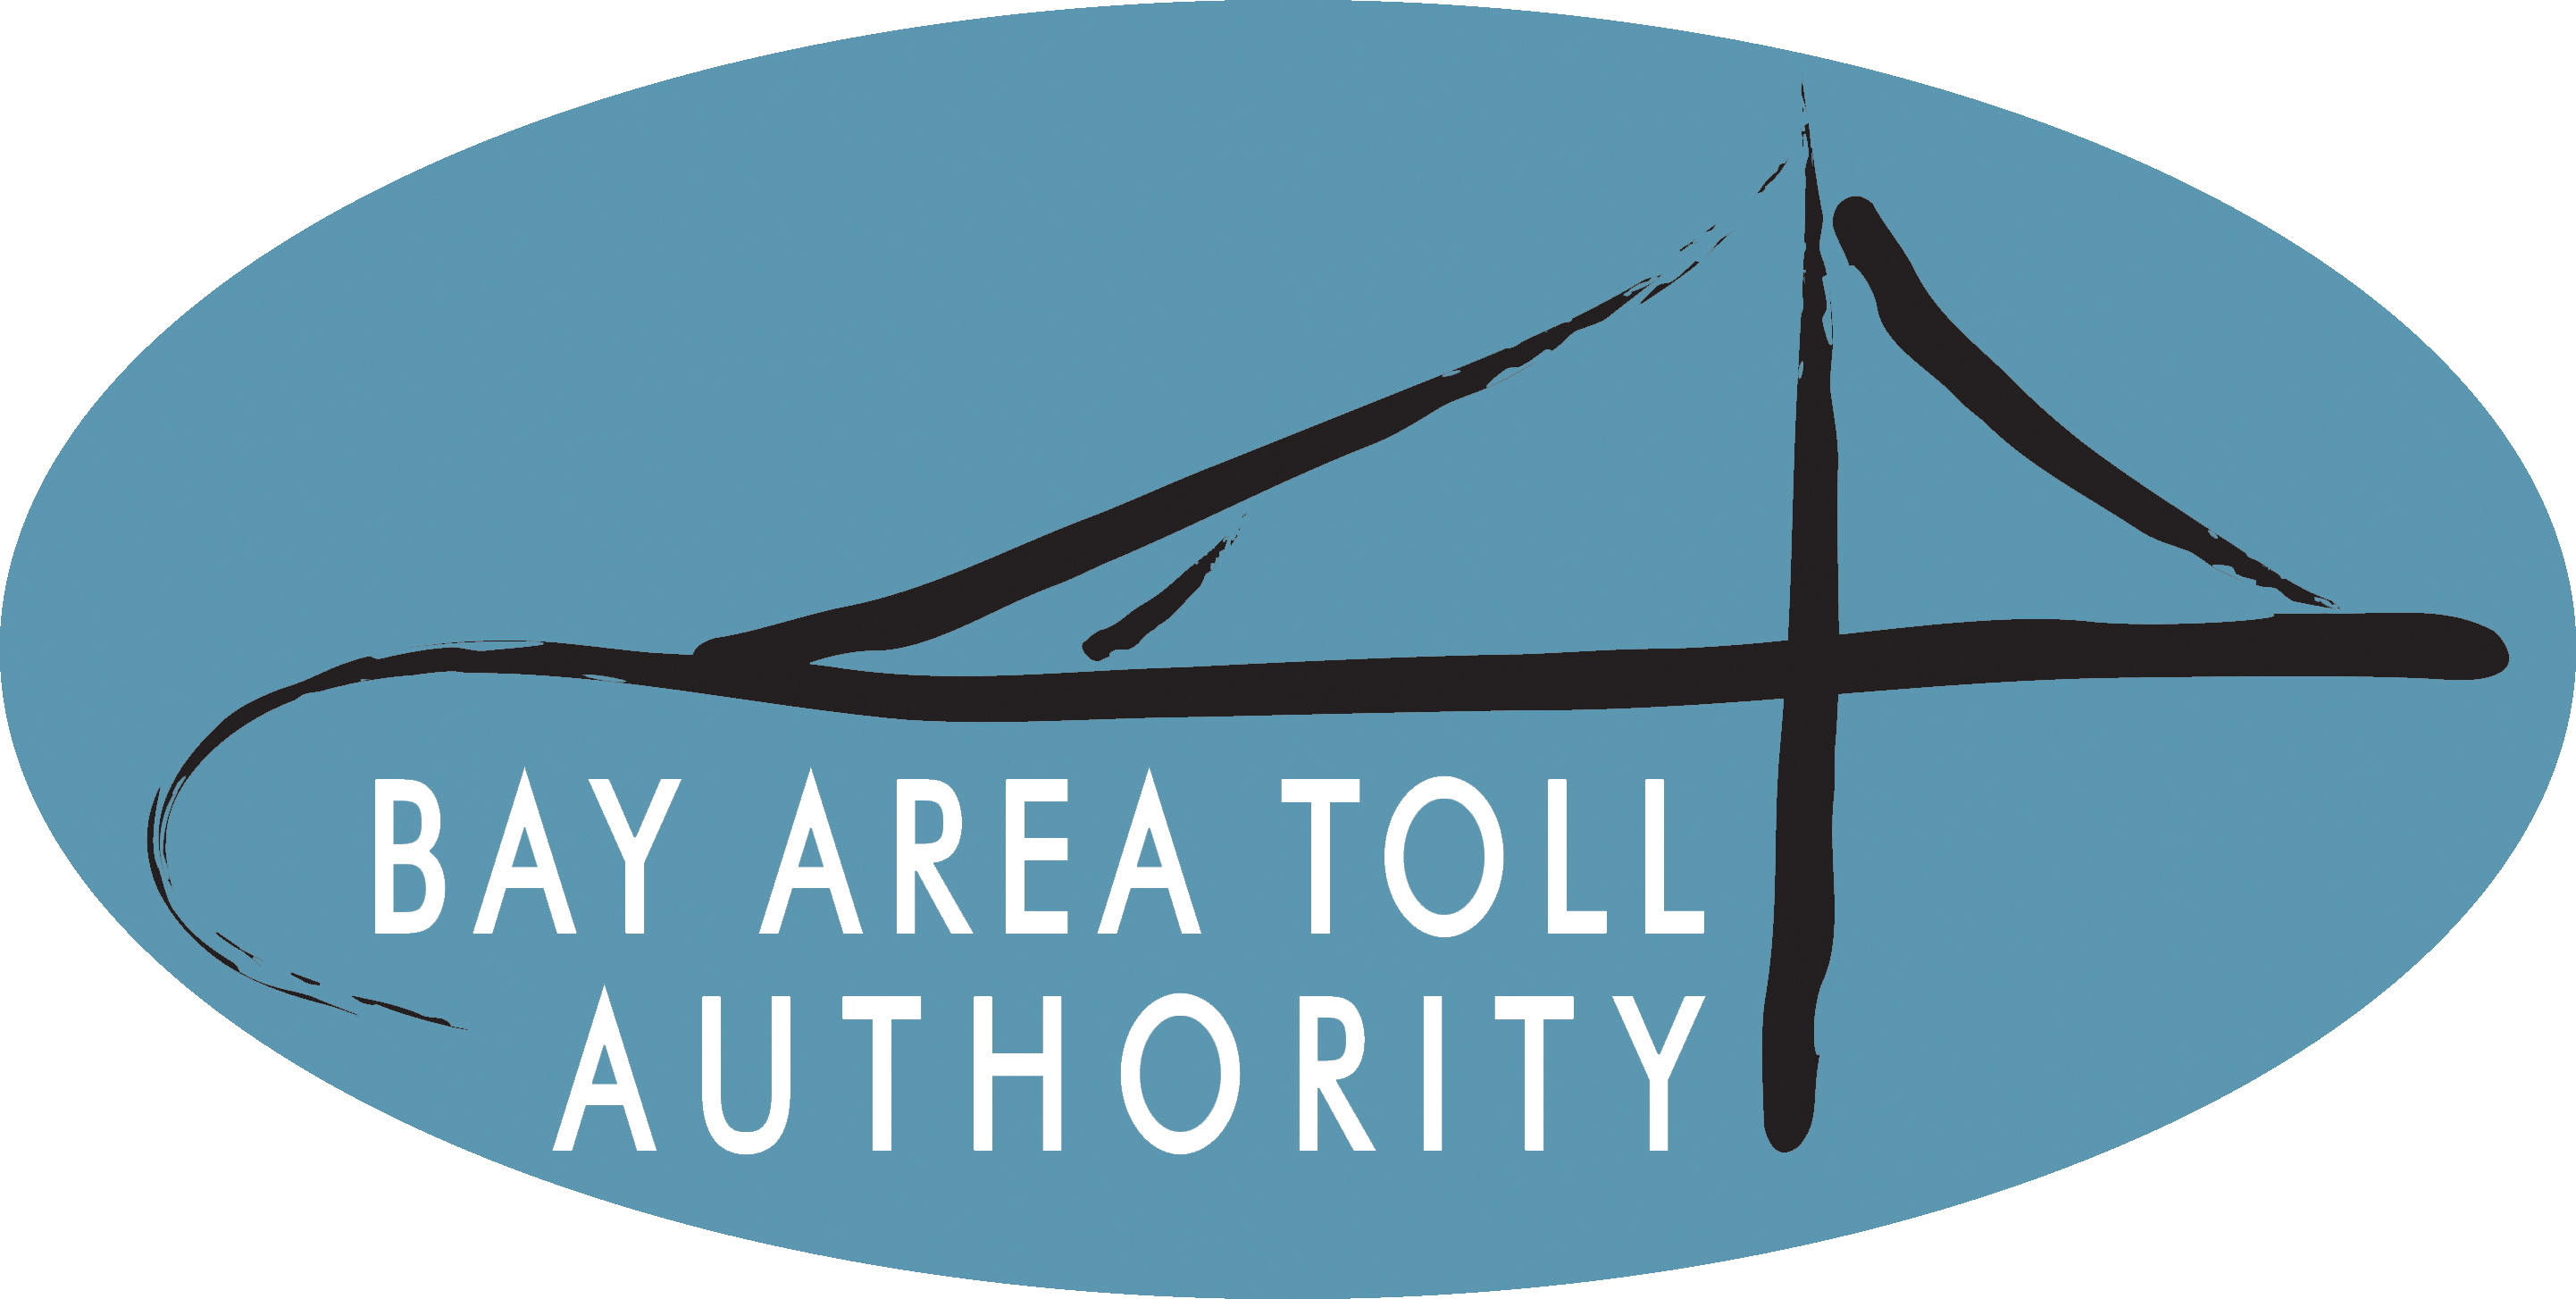 Bay Area Toll Authority - Official Seal or Logo